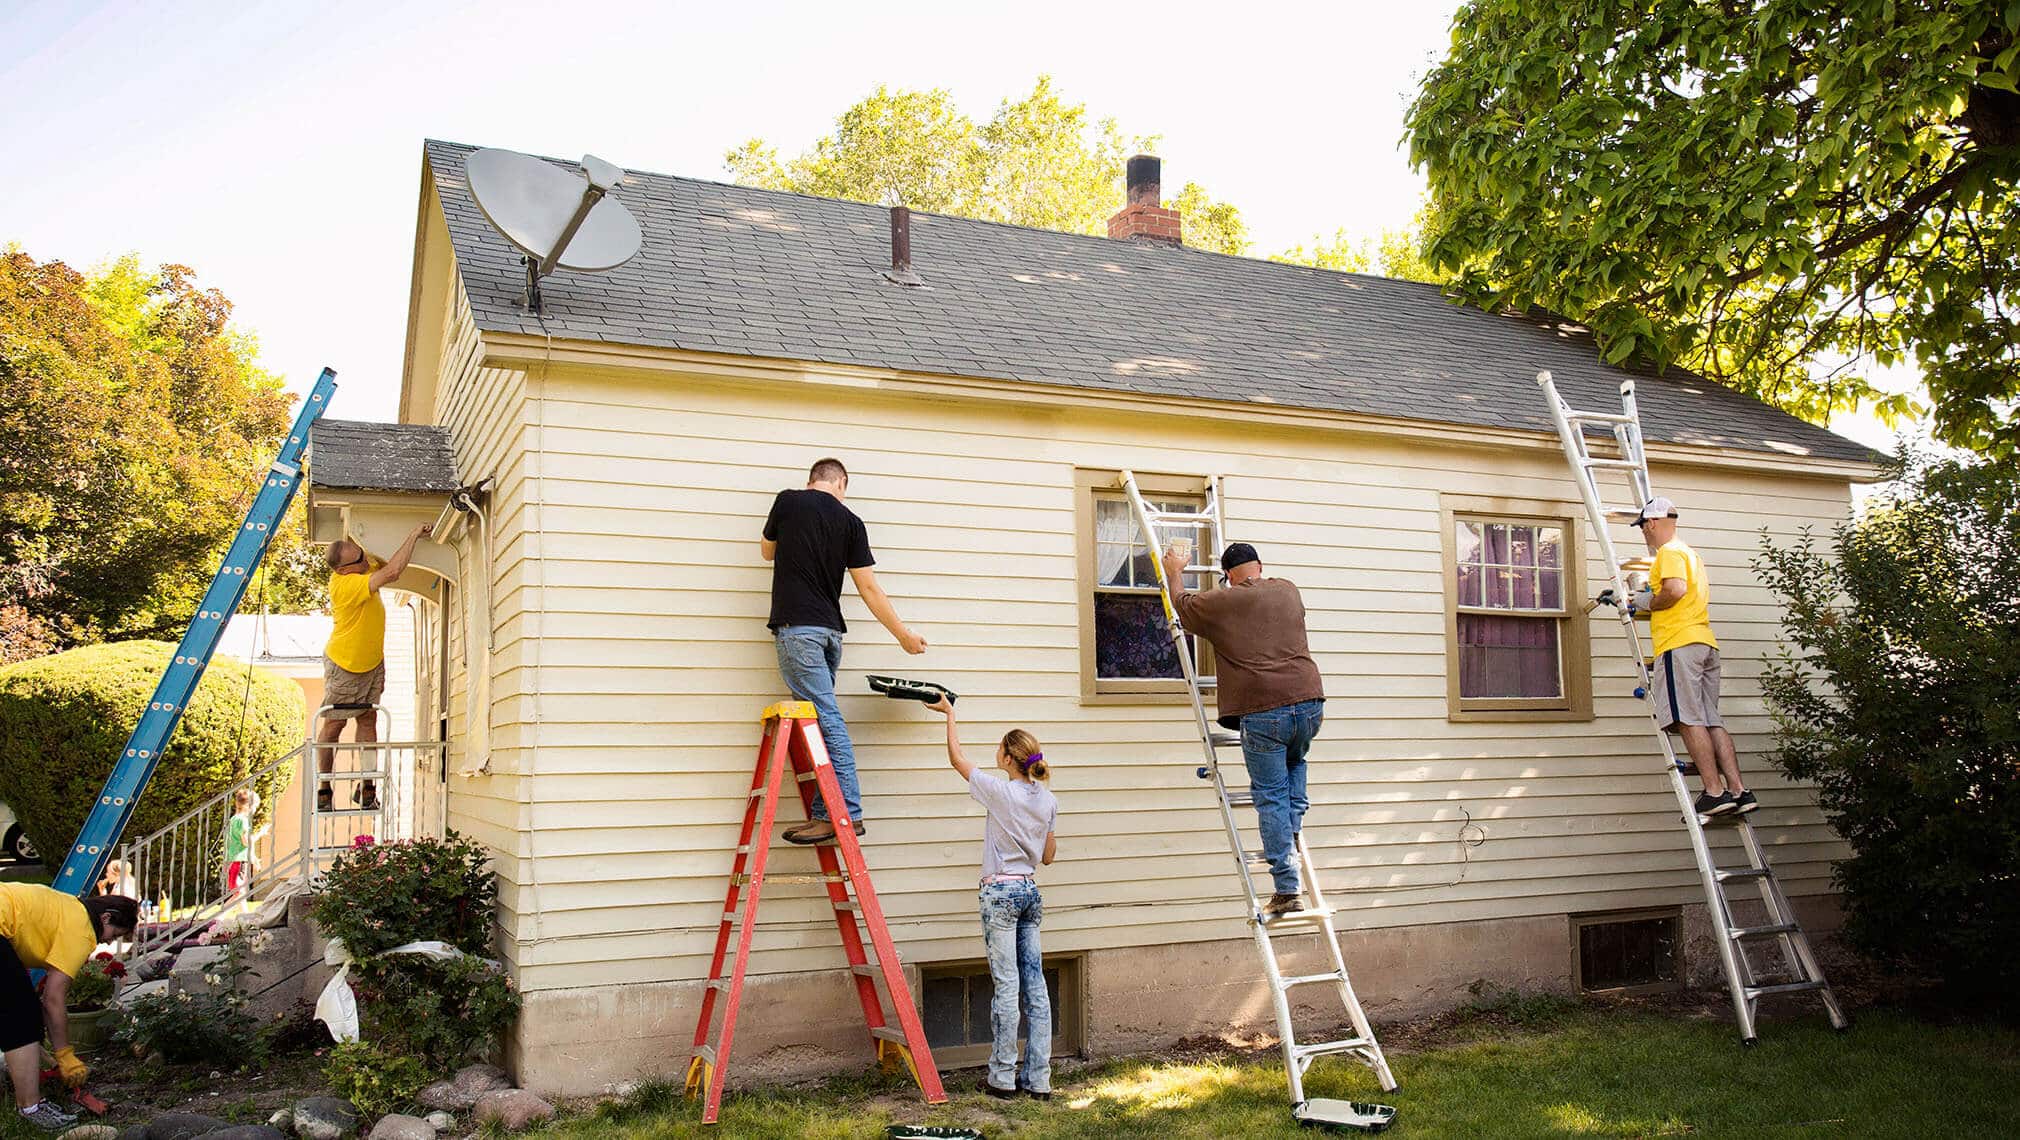 how to sell a fixer upper house fast